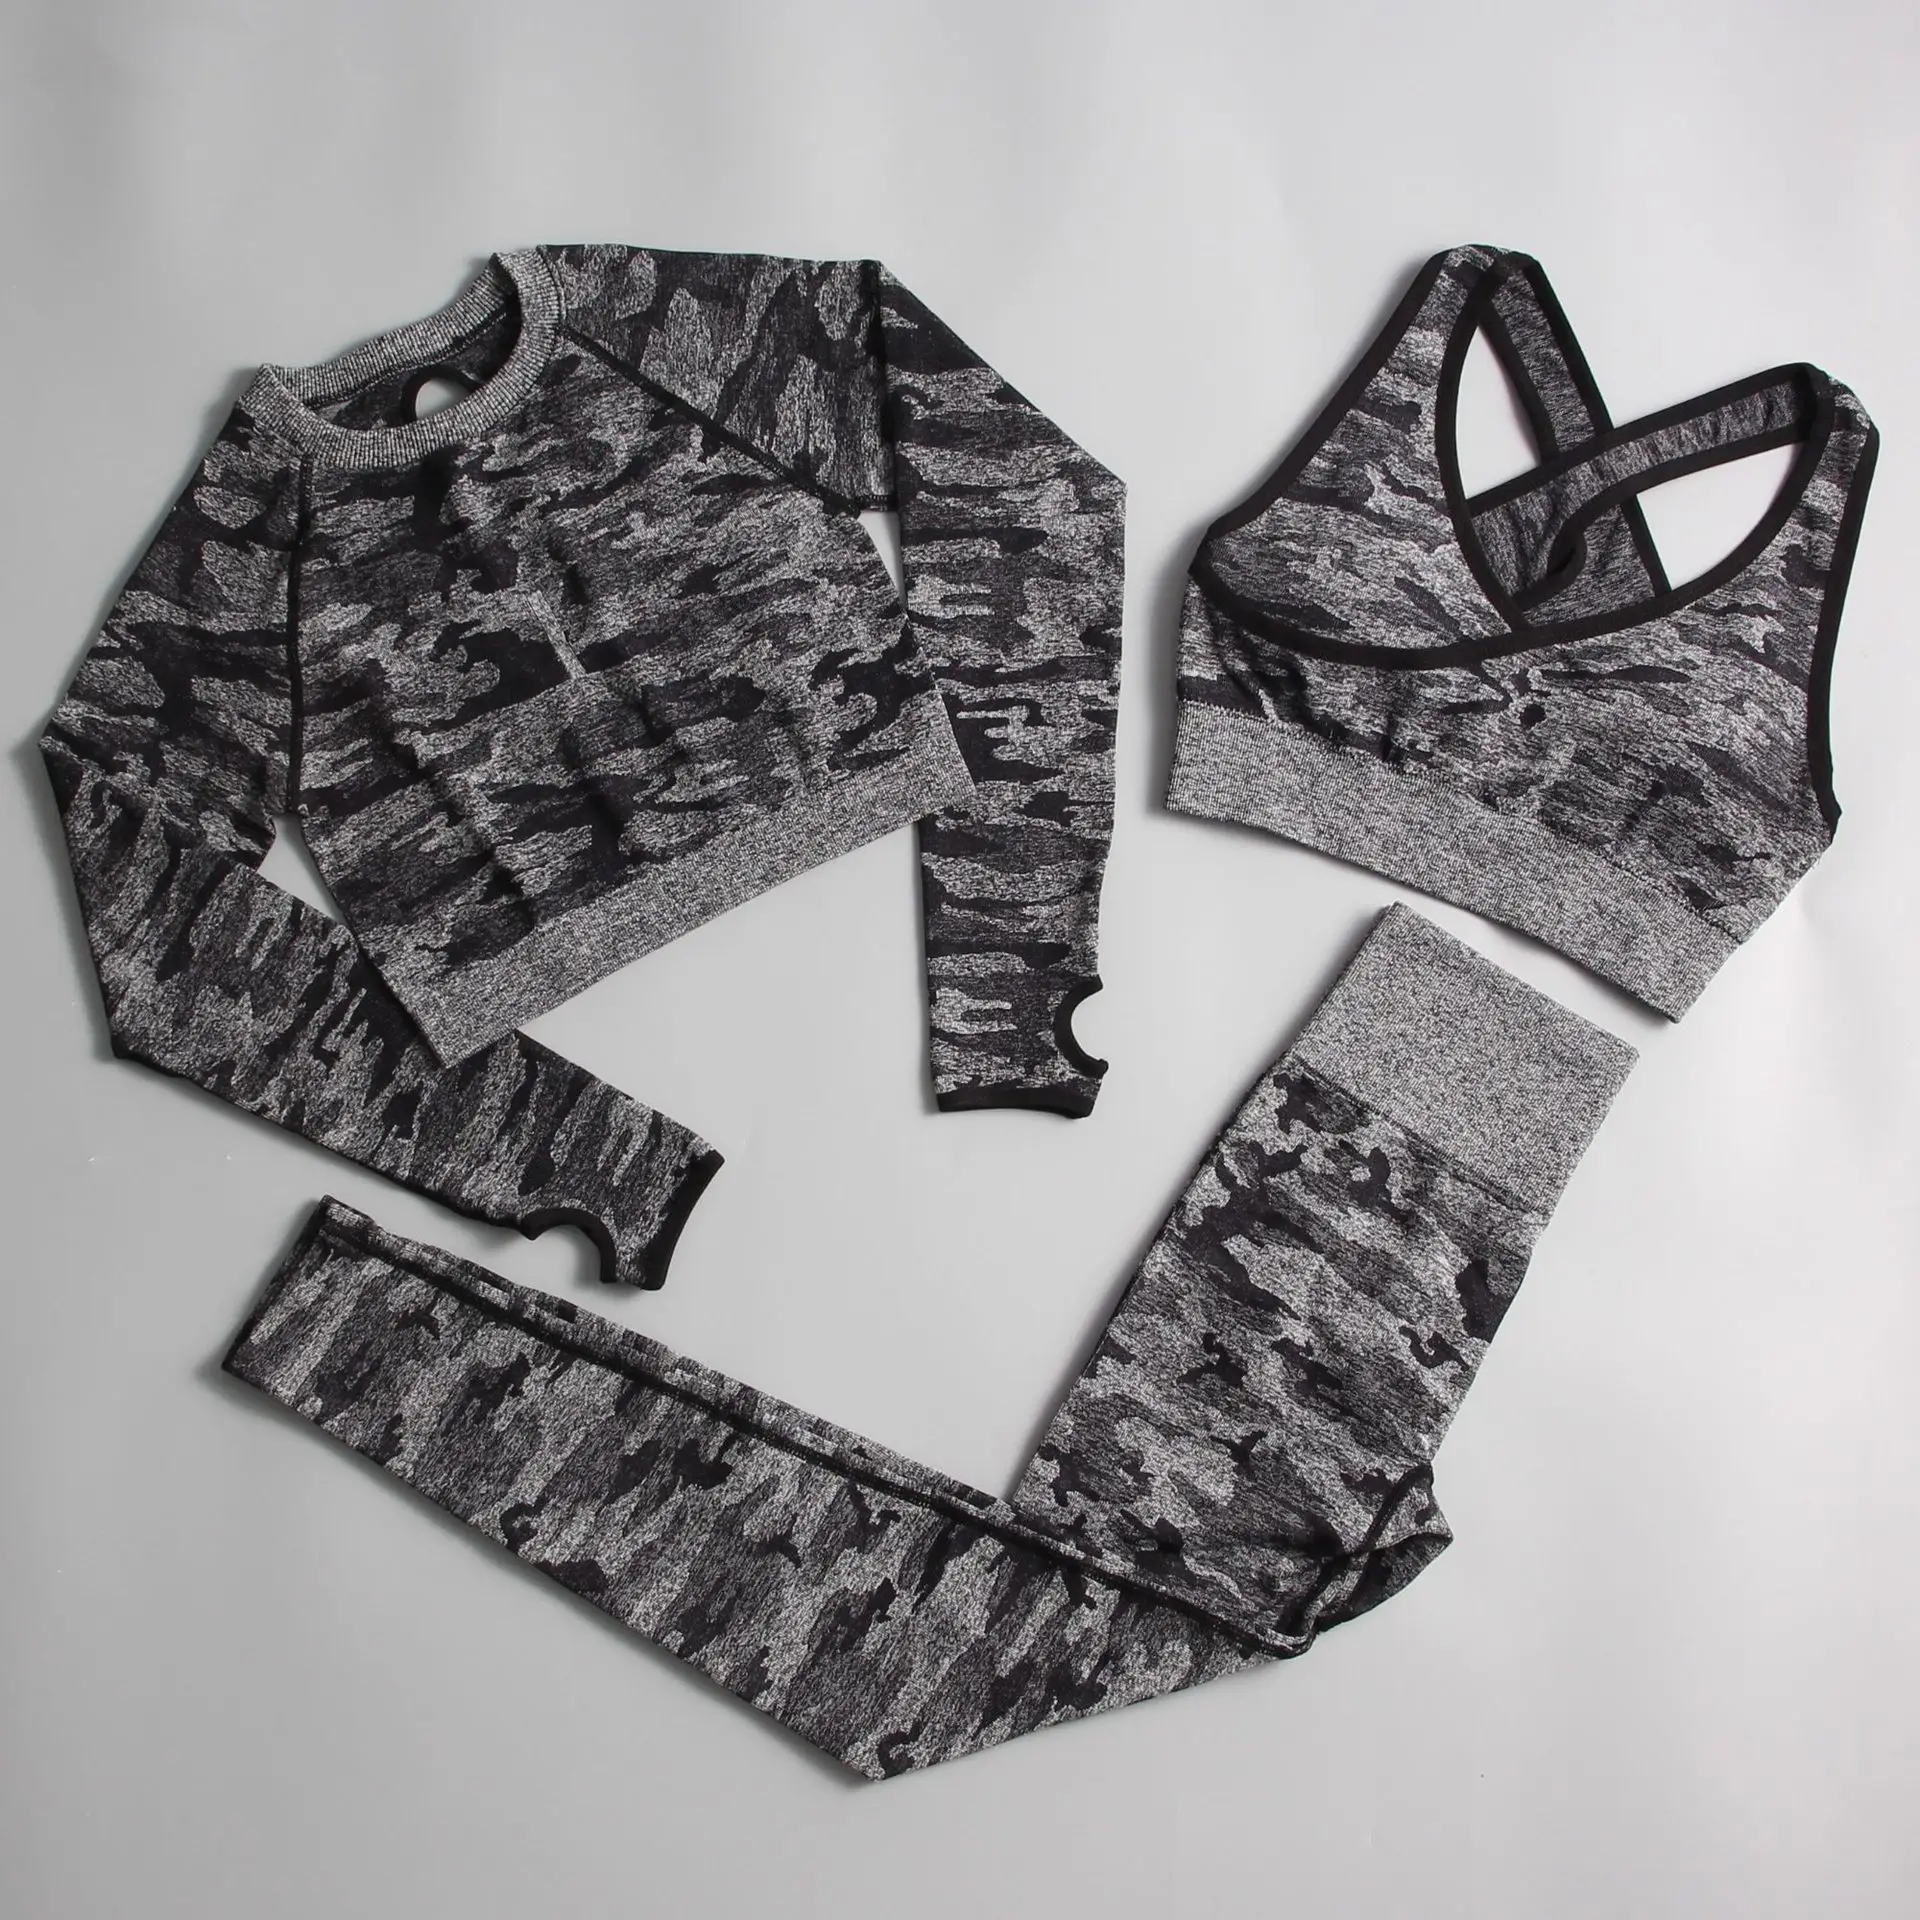 Women's Sportswear Yoga Set Workout Clothes Athletic Wear Sports Gym Legging Camo Fitness Bra Crop Top Long Sleeve Exercise Suit